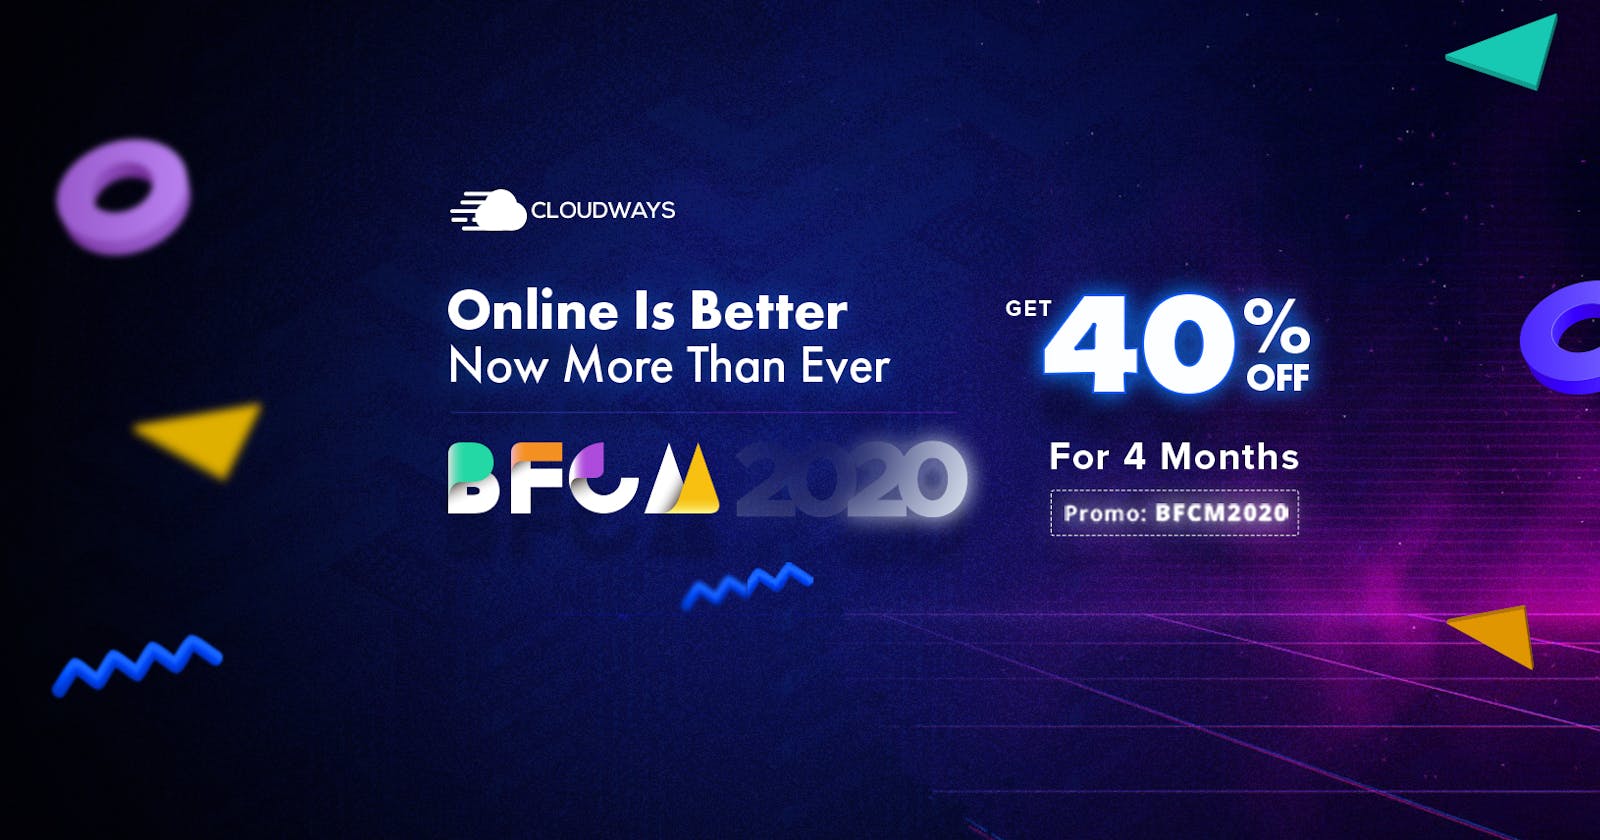 40% OFF for 4 months - Cloudways Black Friday 2020 Offer